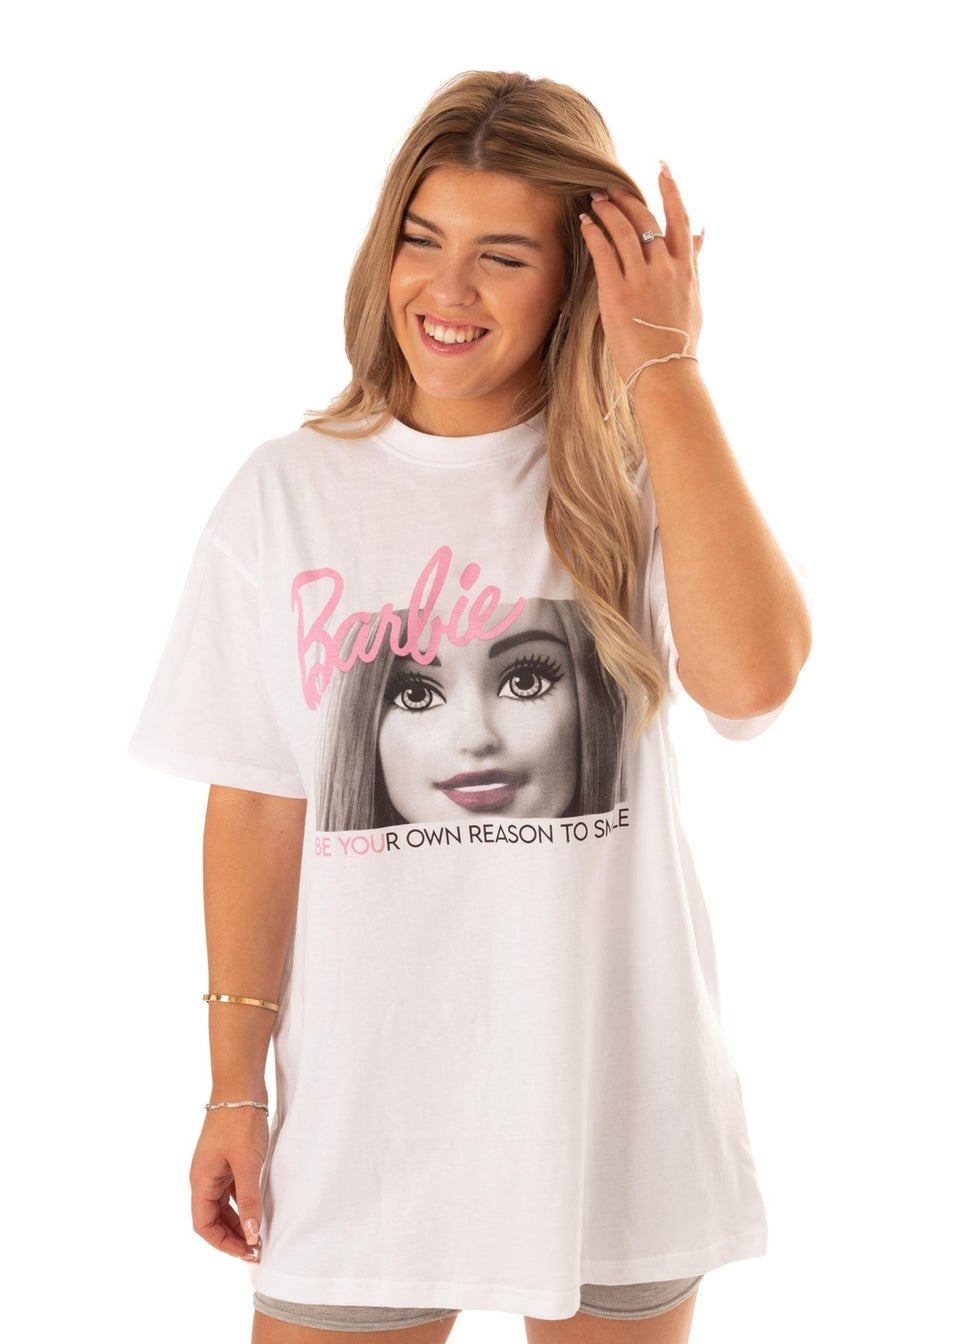 Barbie White Be Your Own Reason To Smile Short-Sleeved T-Shirt